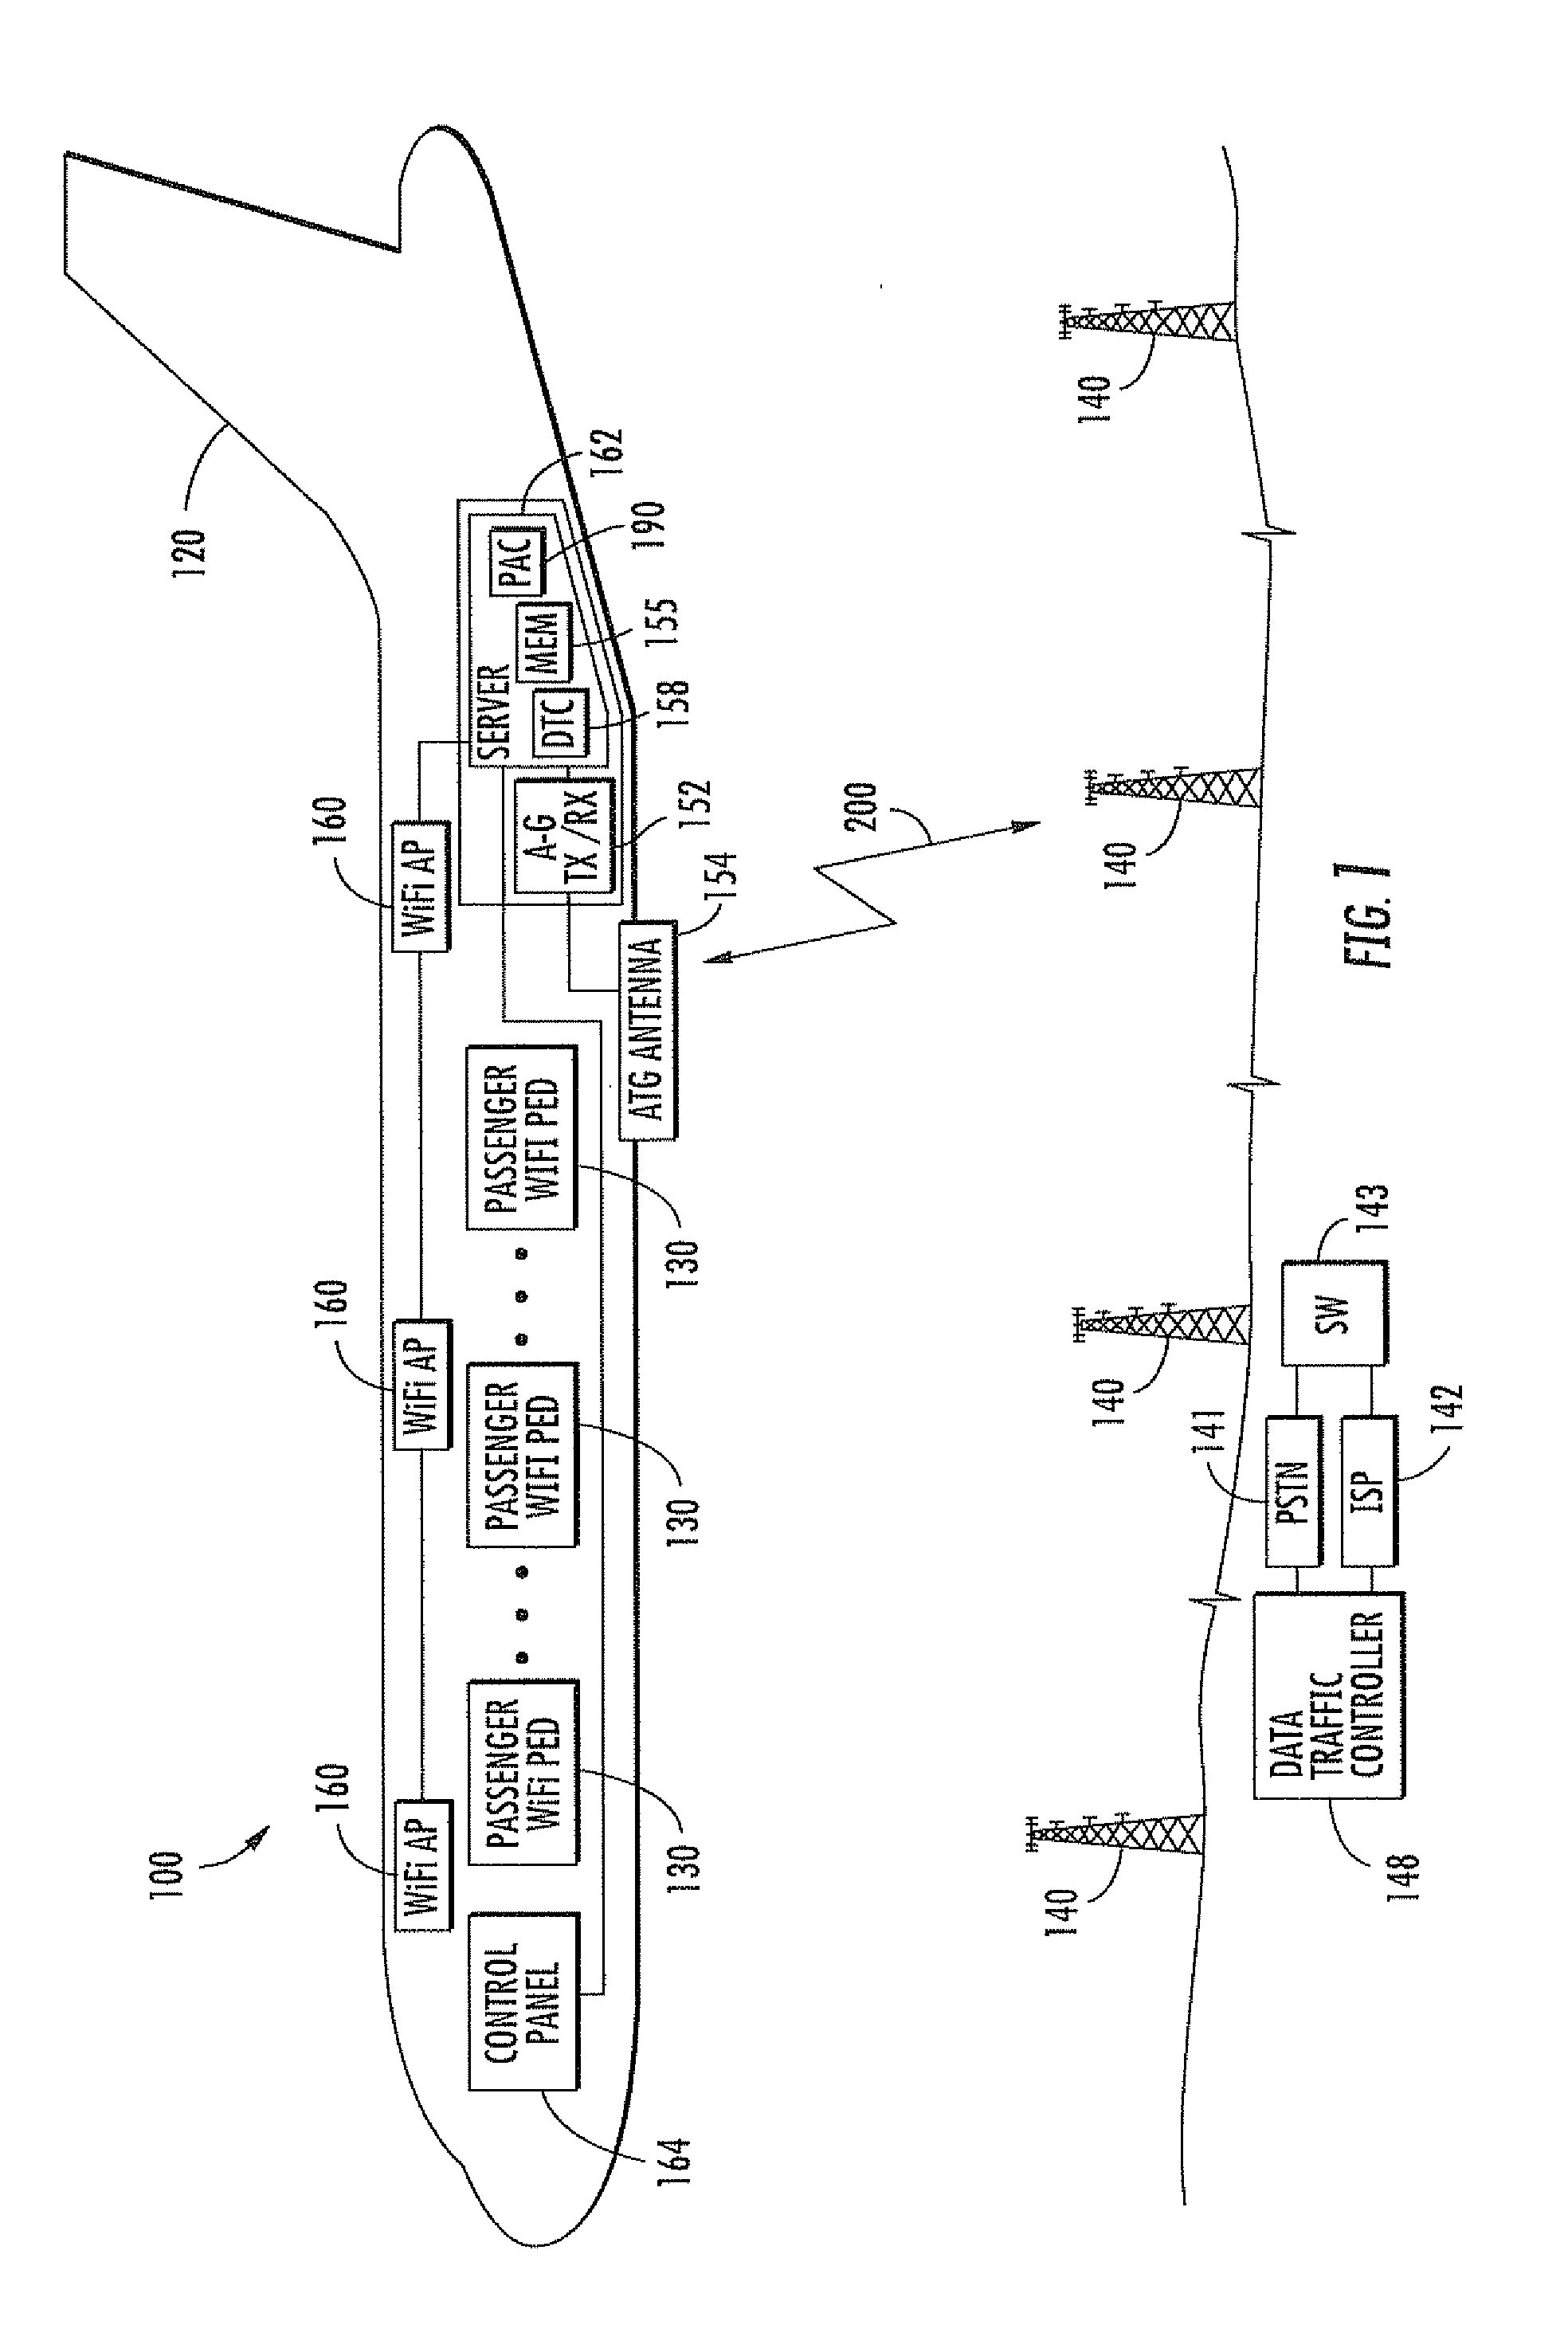 Registration of a personal electronic device (PED) with an aircraft ife system using aircraft generated registration token images and associated methods